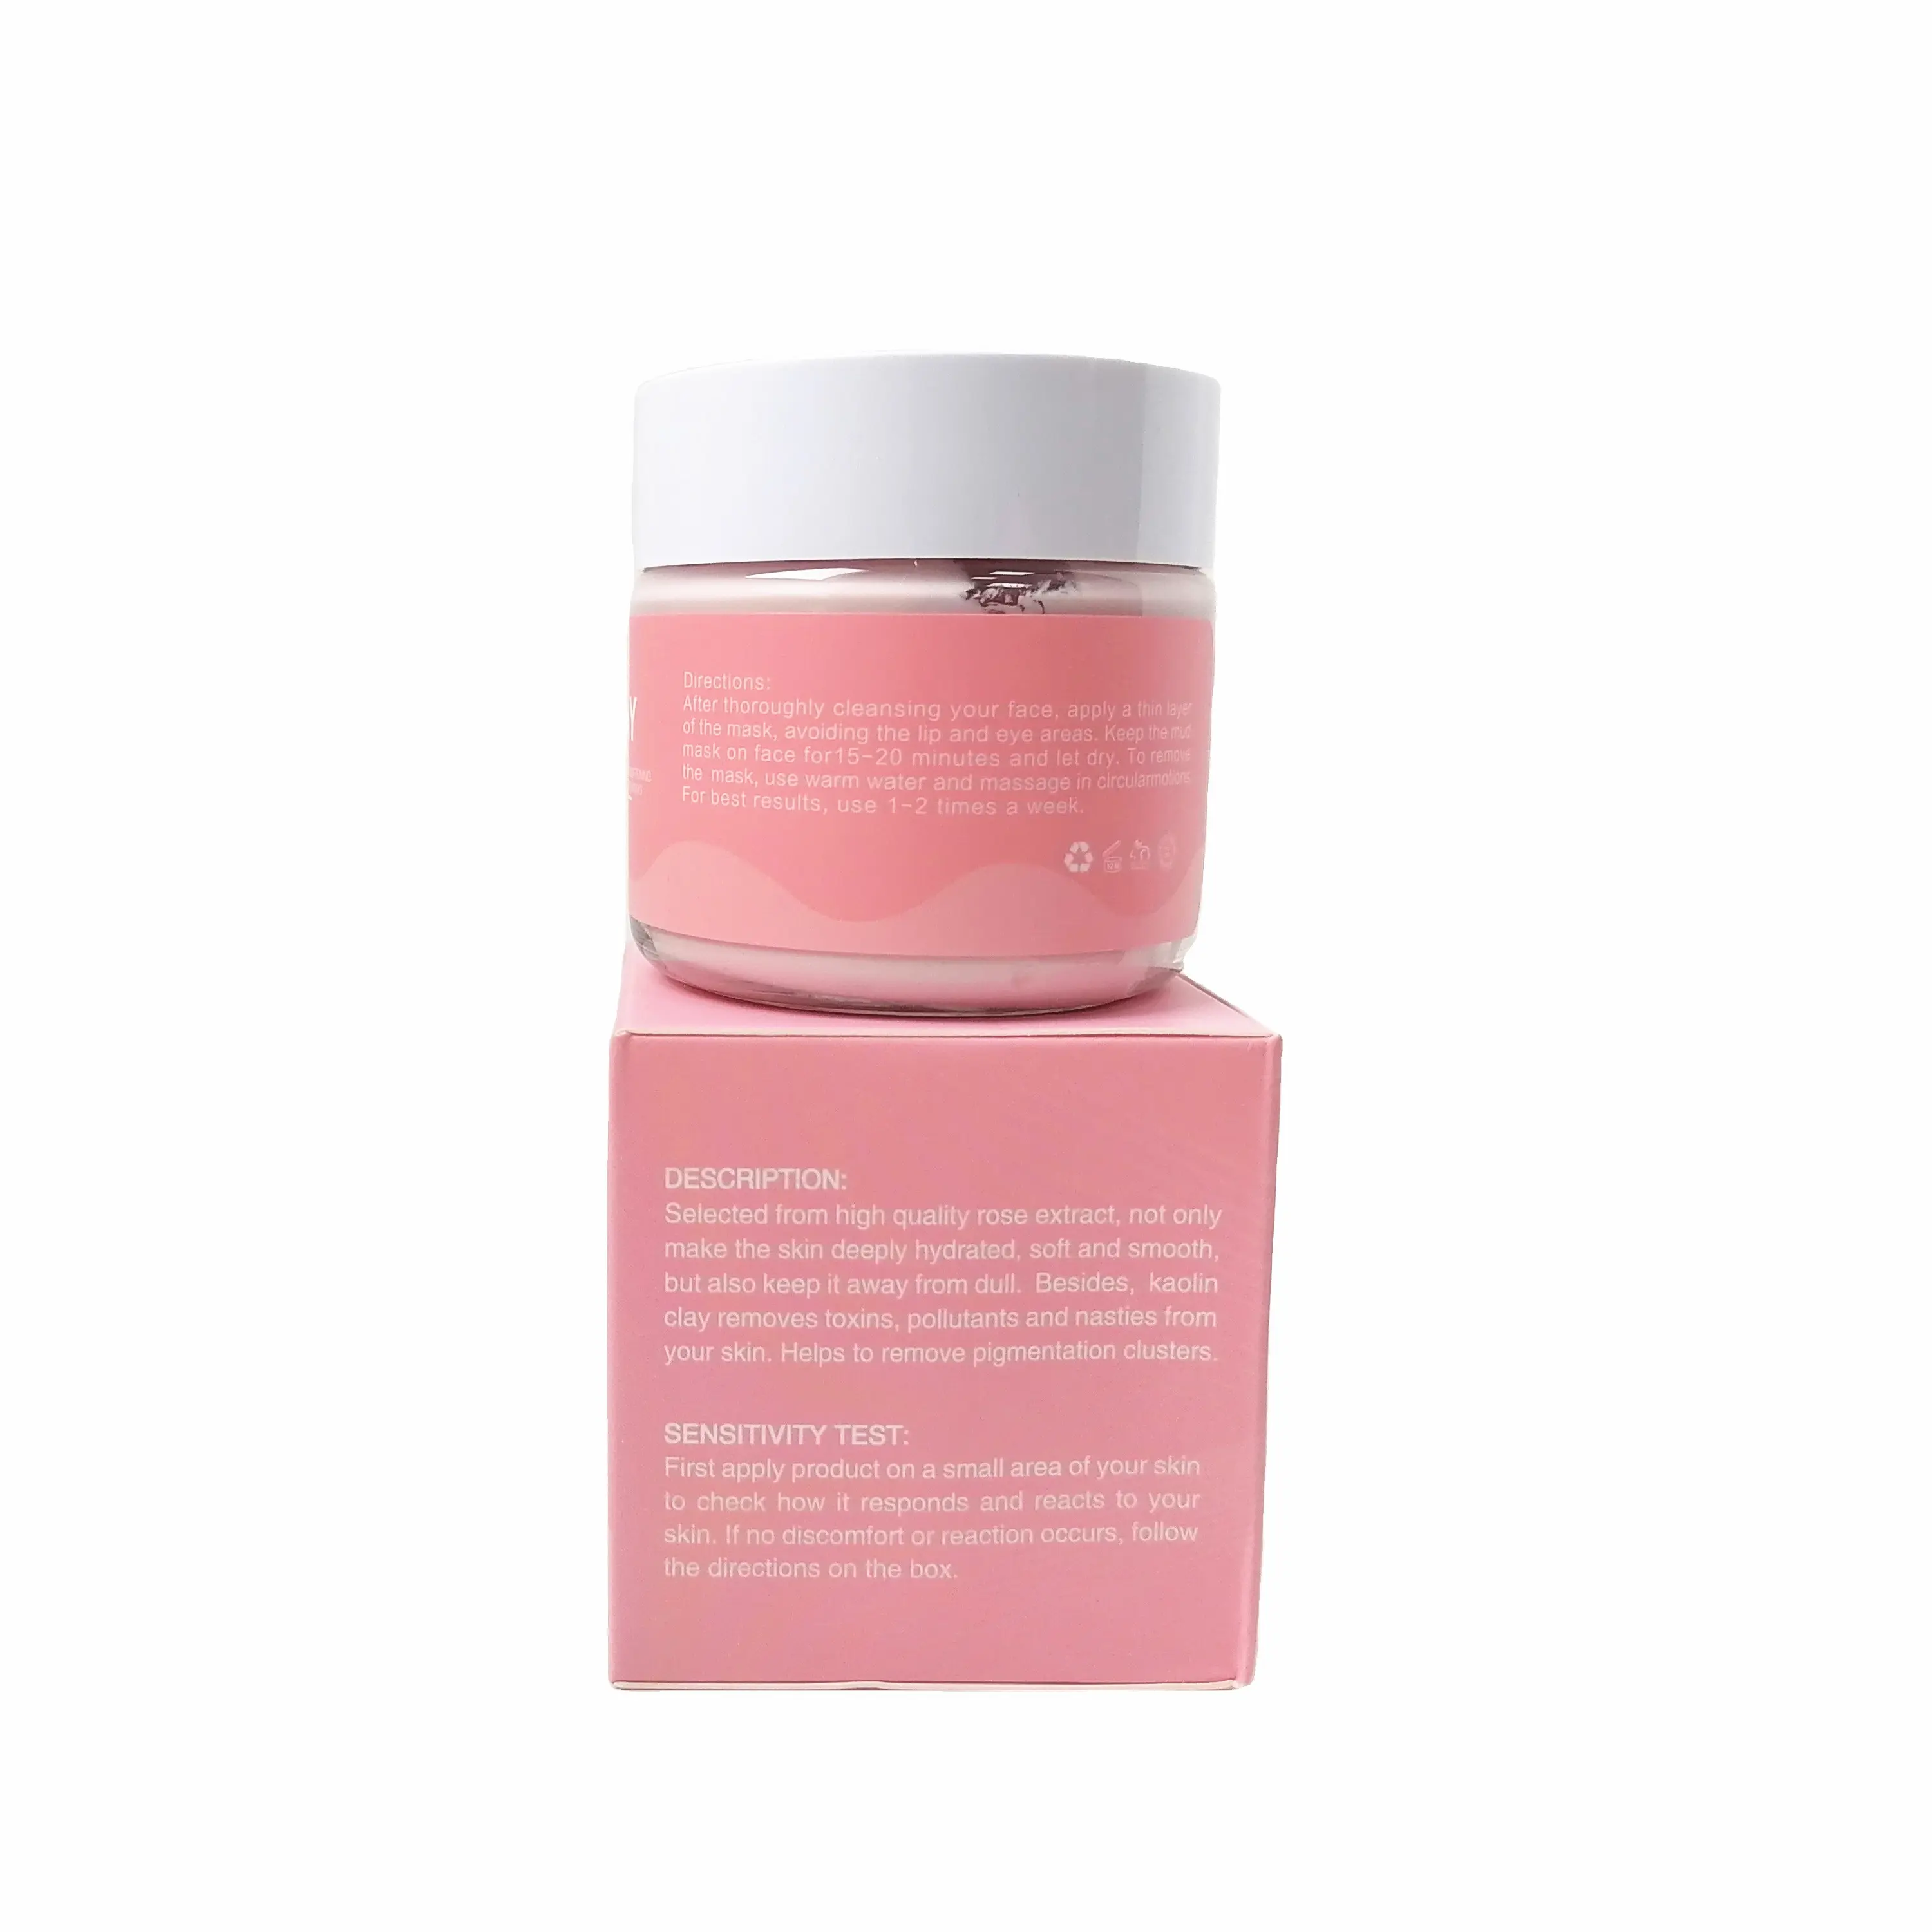 Free Shipping 10 Pieces Pink Clay Mask Alya Cleanse & Purify your Skin 100% AUSTRALIAN Pink Clay